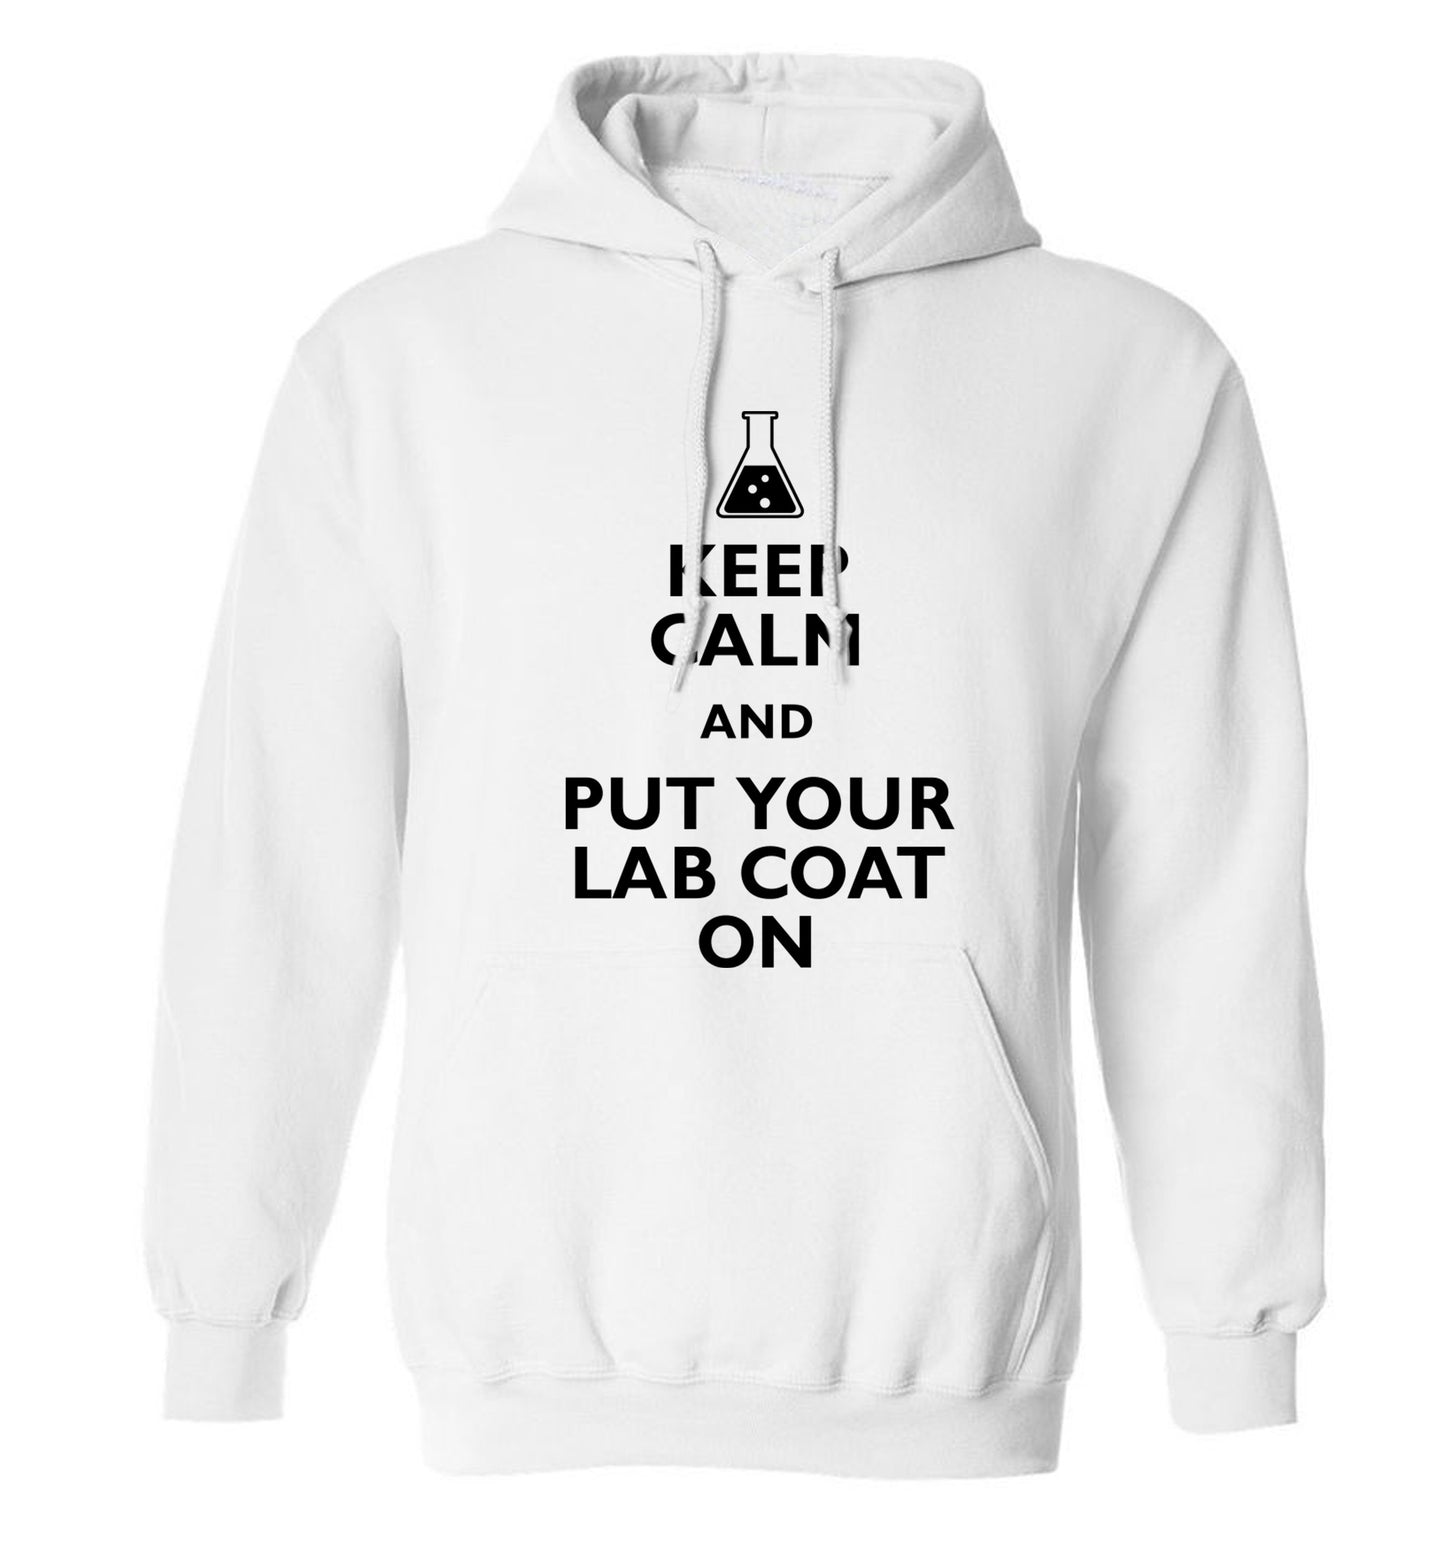 Keep calm and put your lab coat on adults unisex white hoodie 2XL